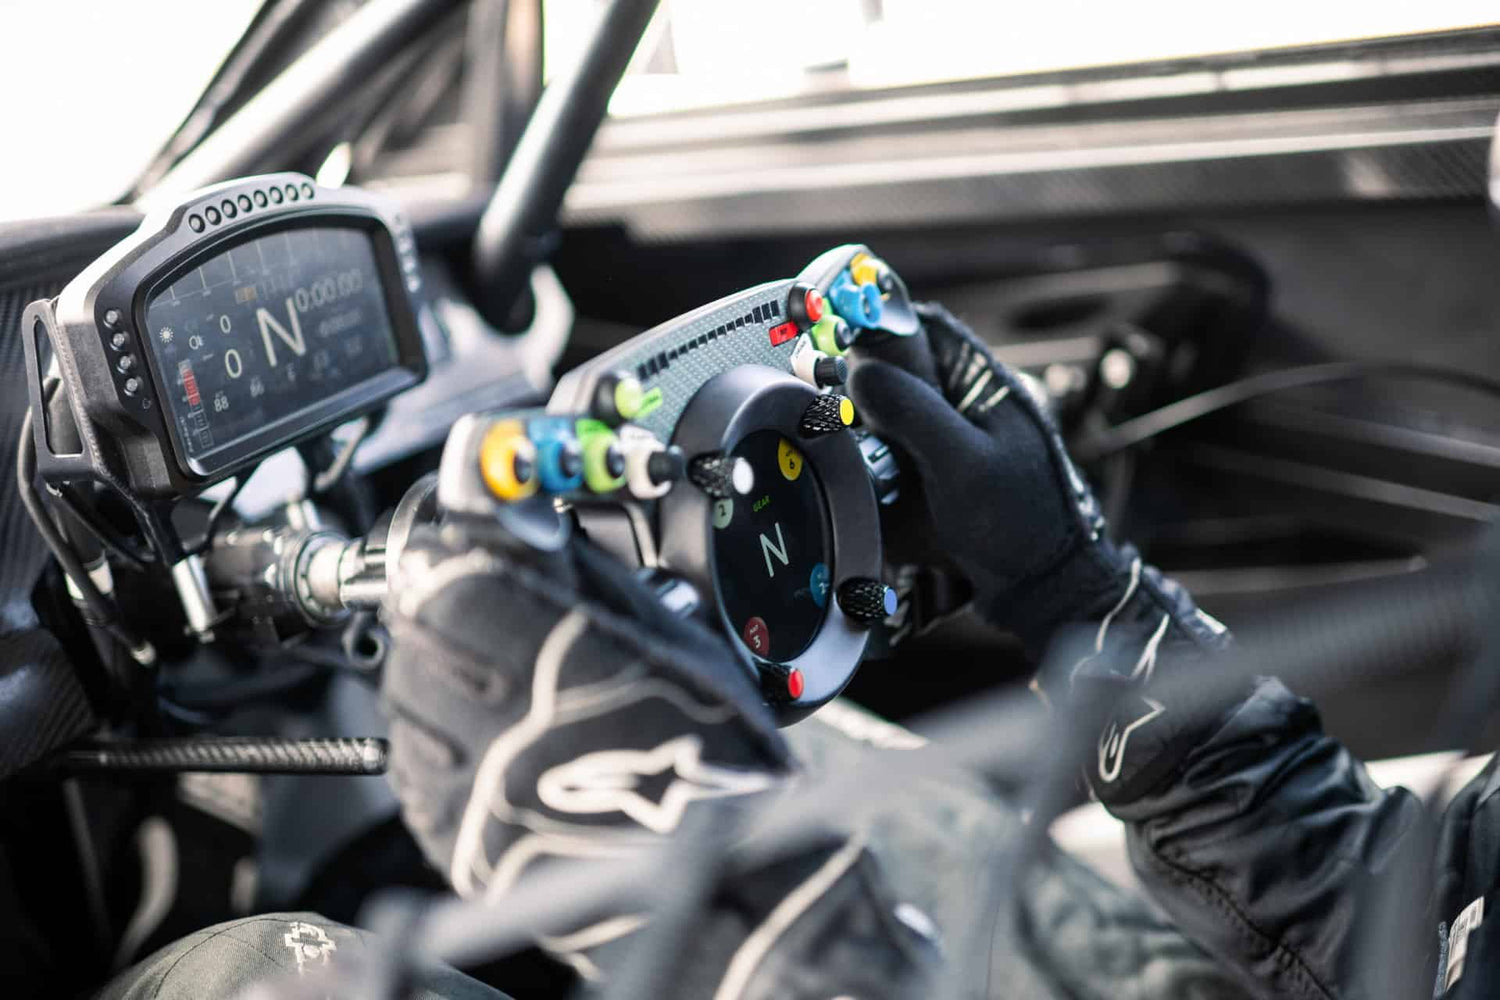 Fanatec Bentley’s Wheel Drives Up Pikes Peak and Your Sim Rig!